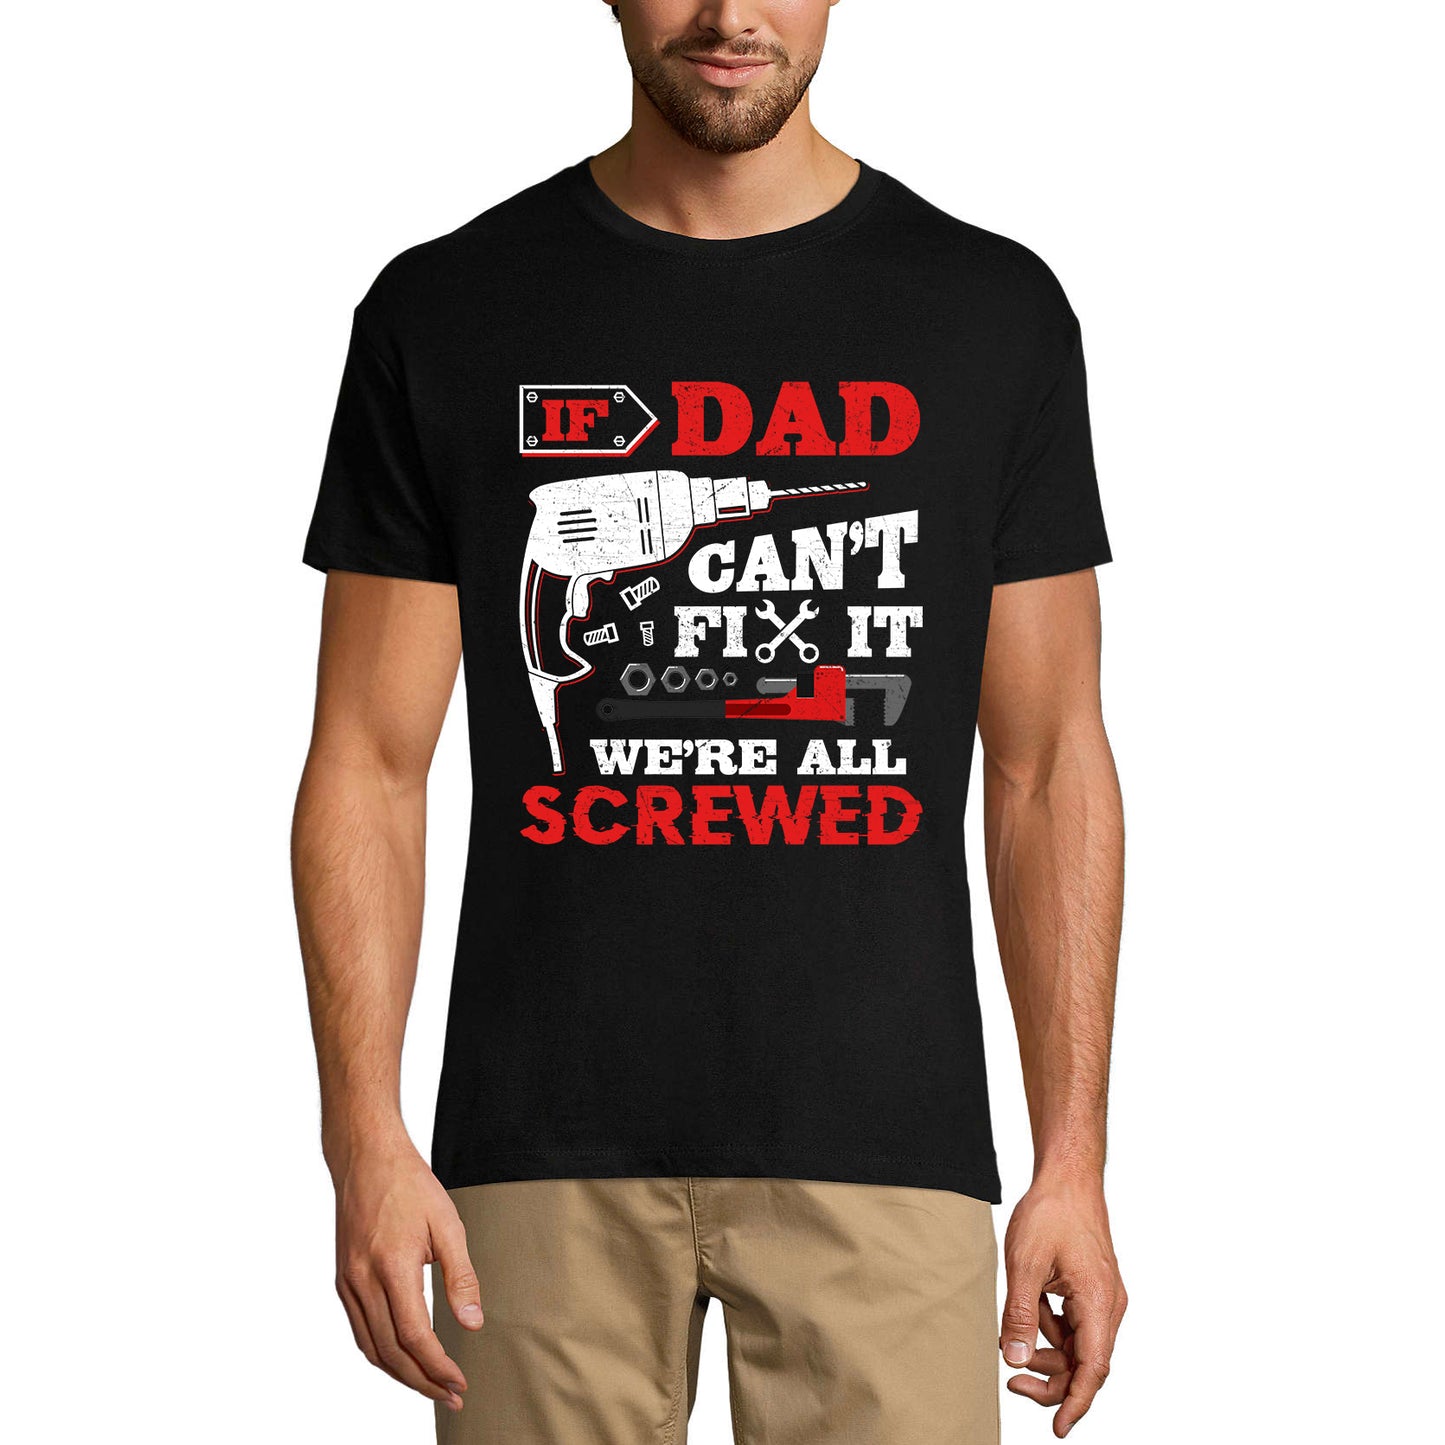 ULTRABASIC Men's Graphic T-Shirt If Dad Can't Fix It - We're All Screwed - Funny Father's Gift